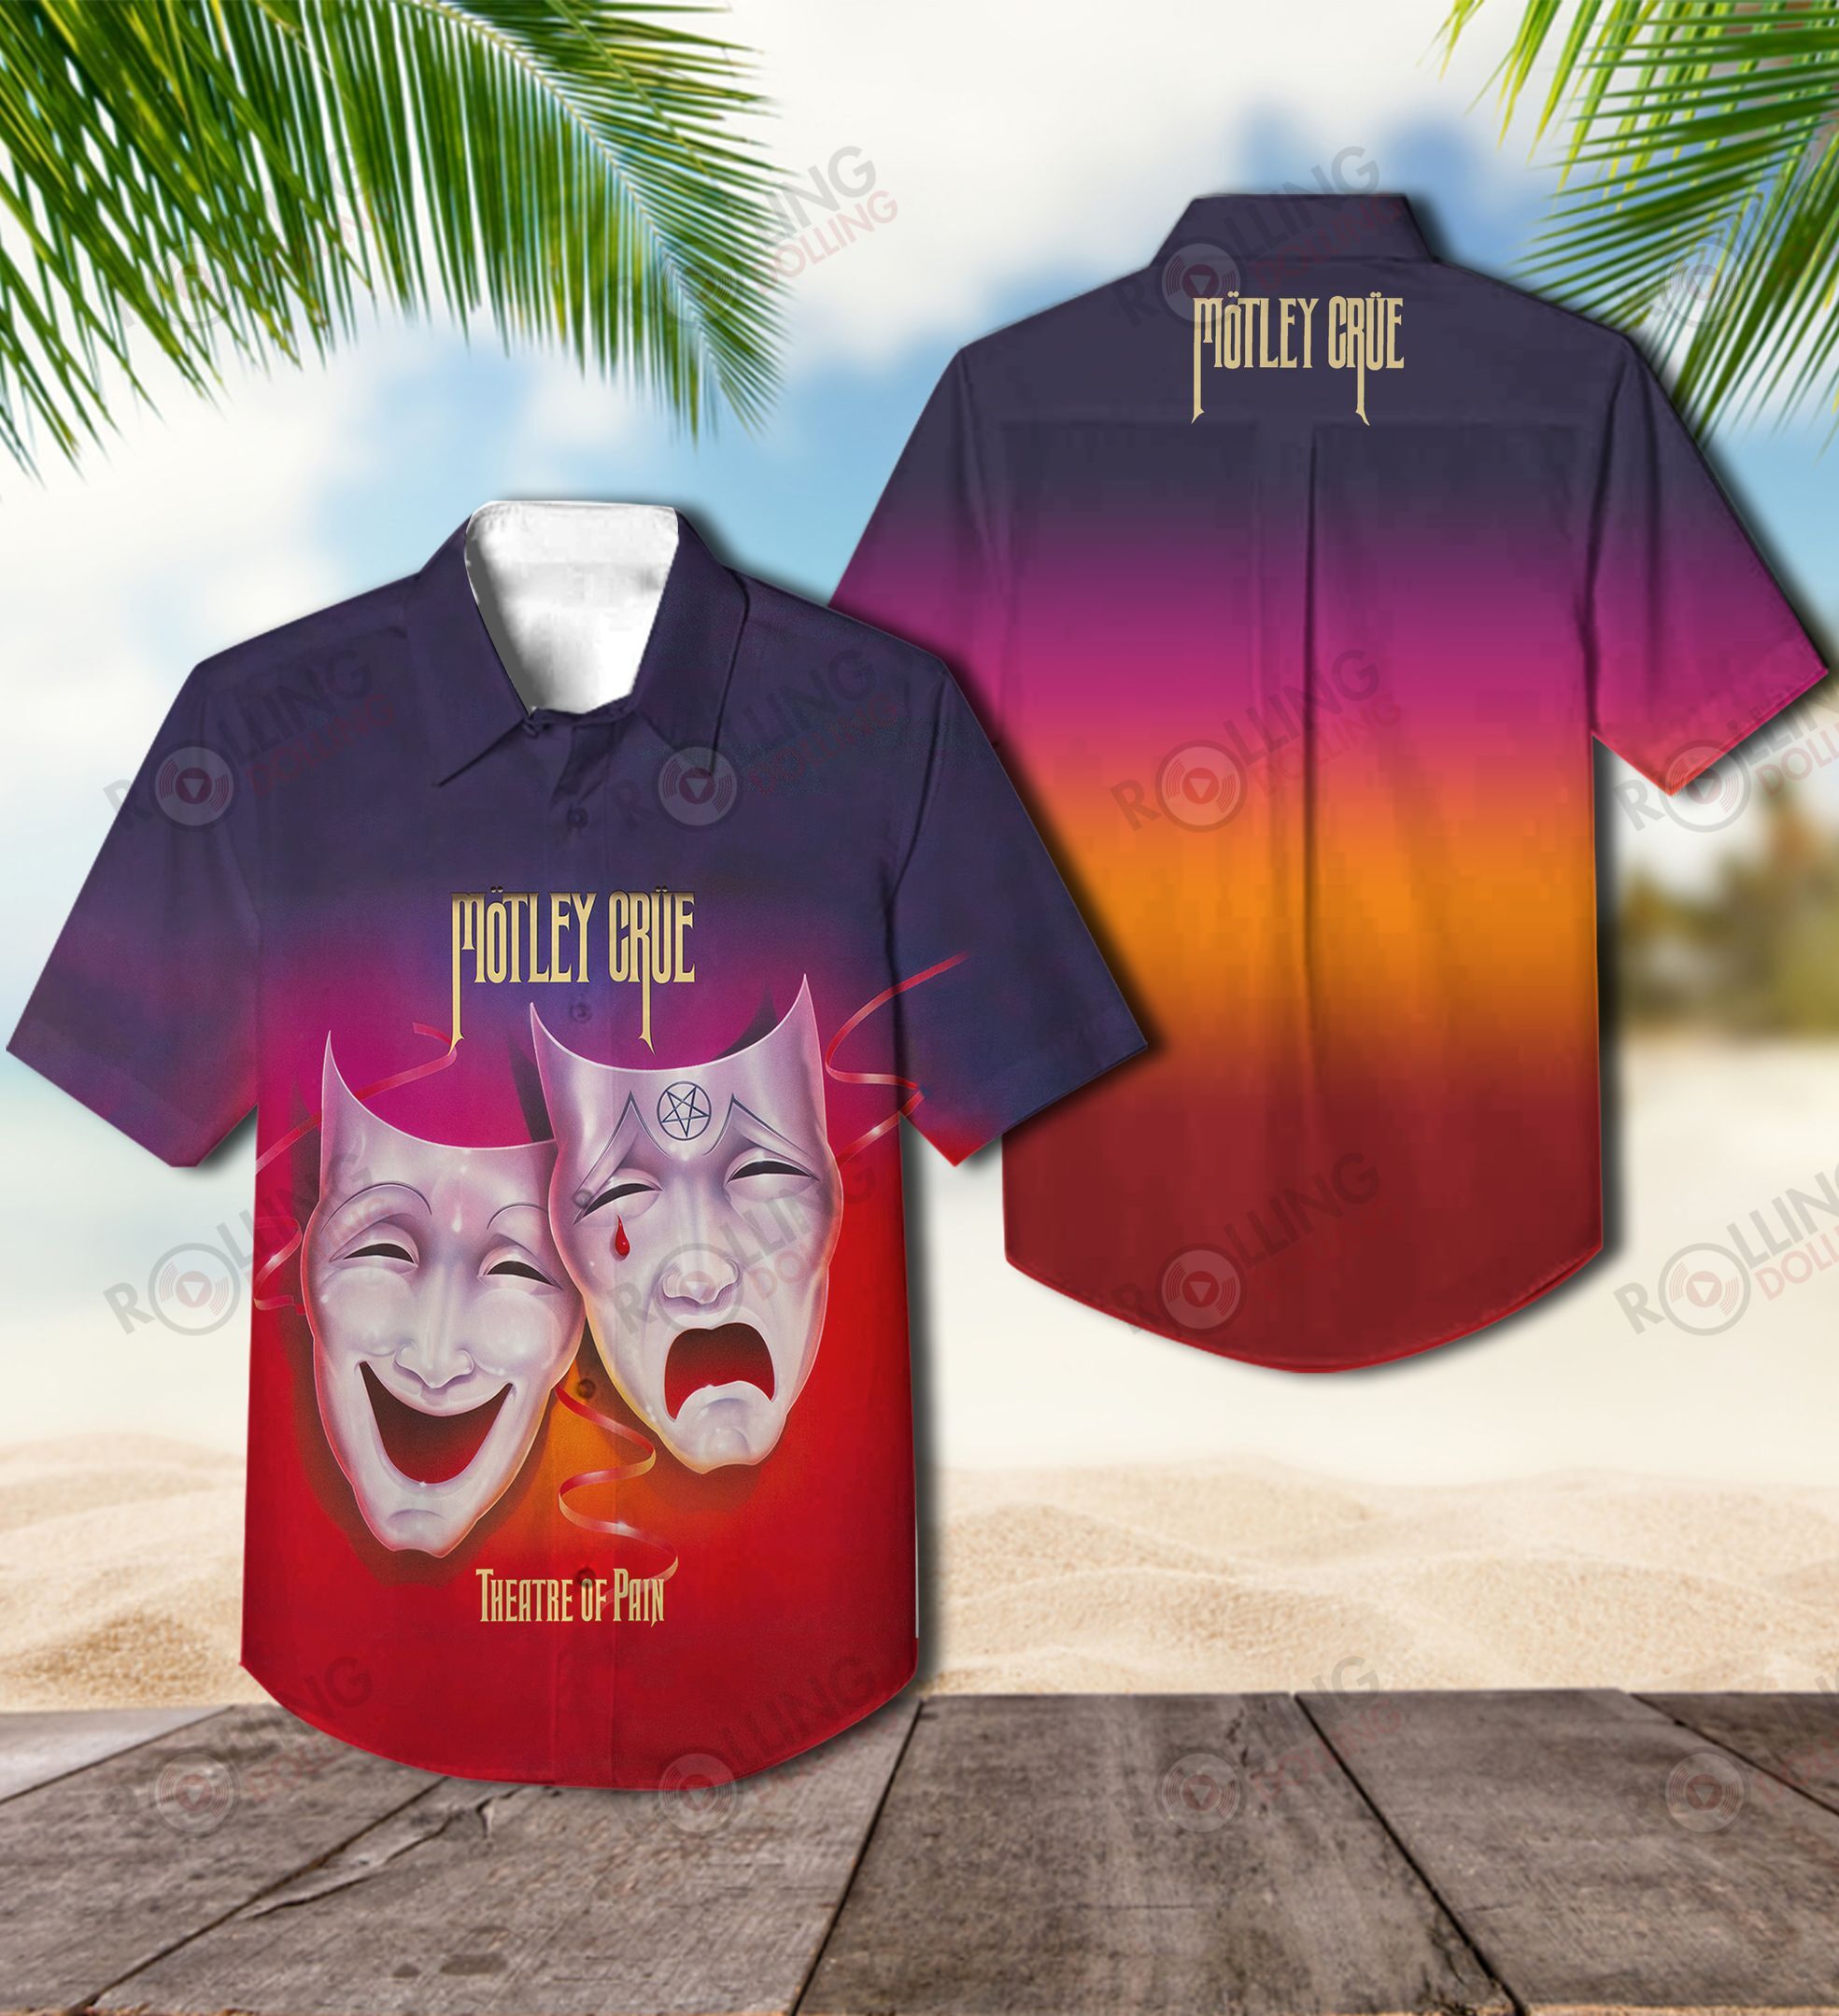 This would make a great gift for any fan who loves Hawaiian Shirt as well as Rock band 91